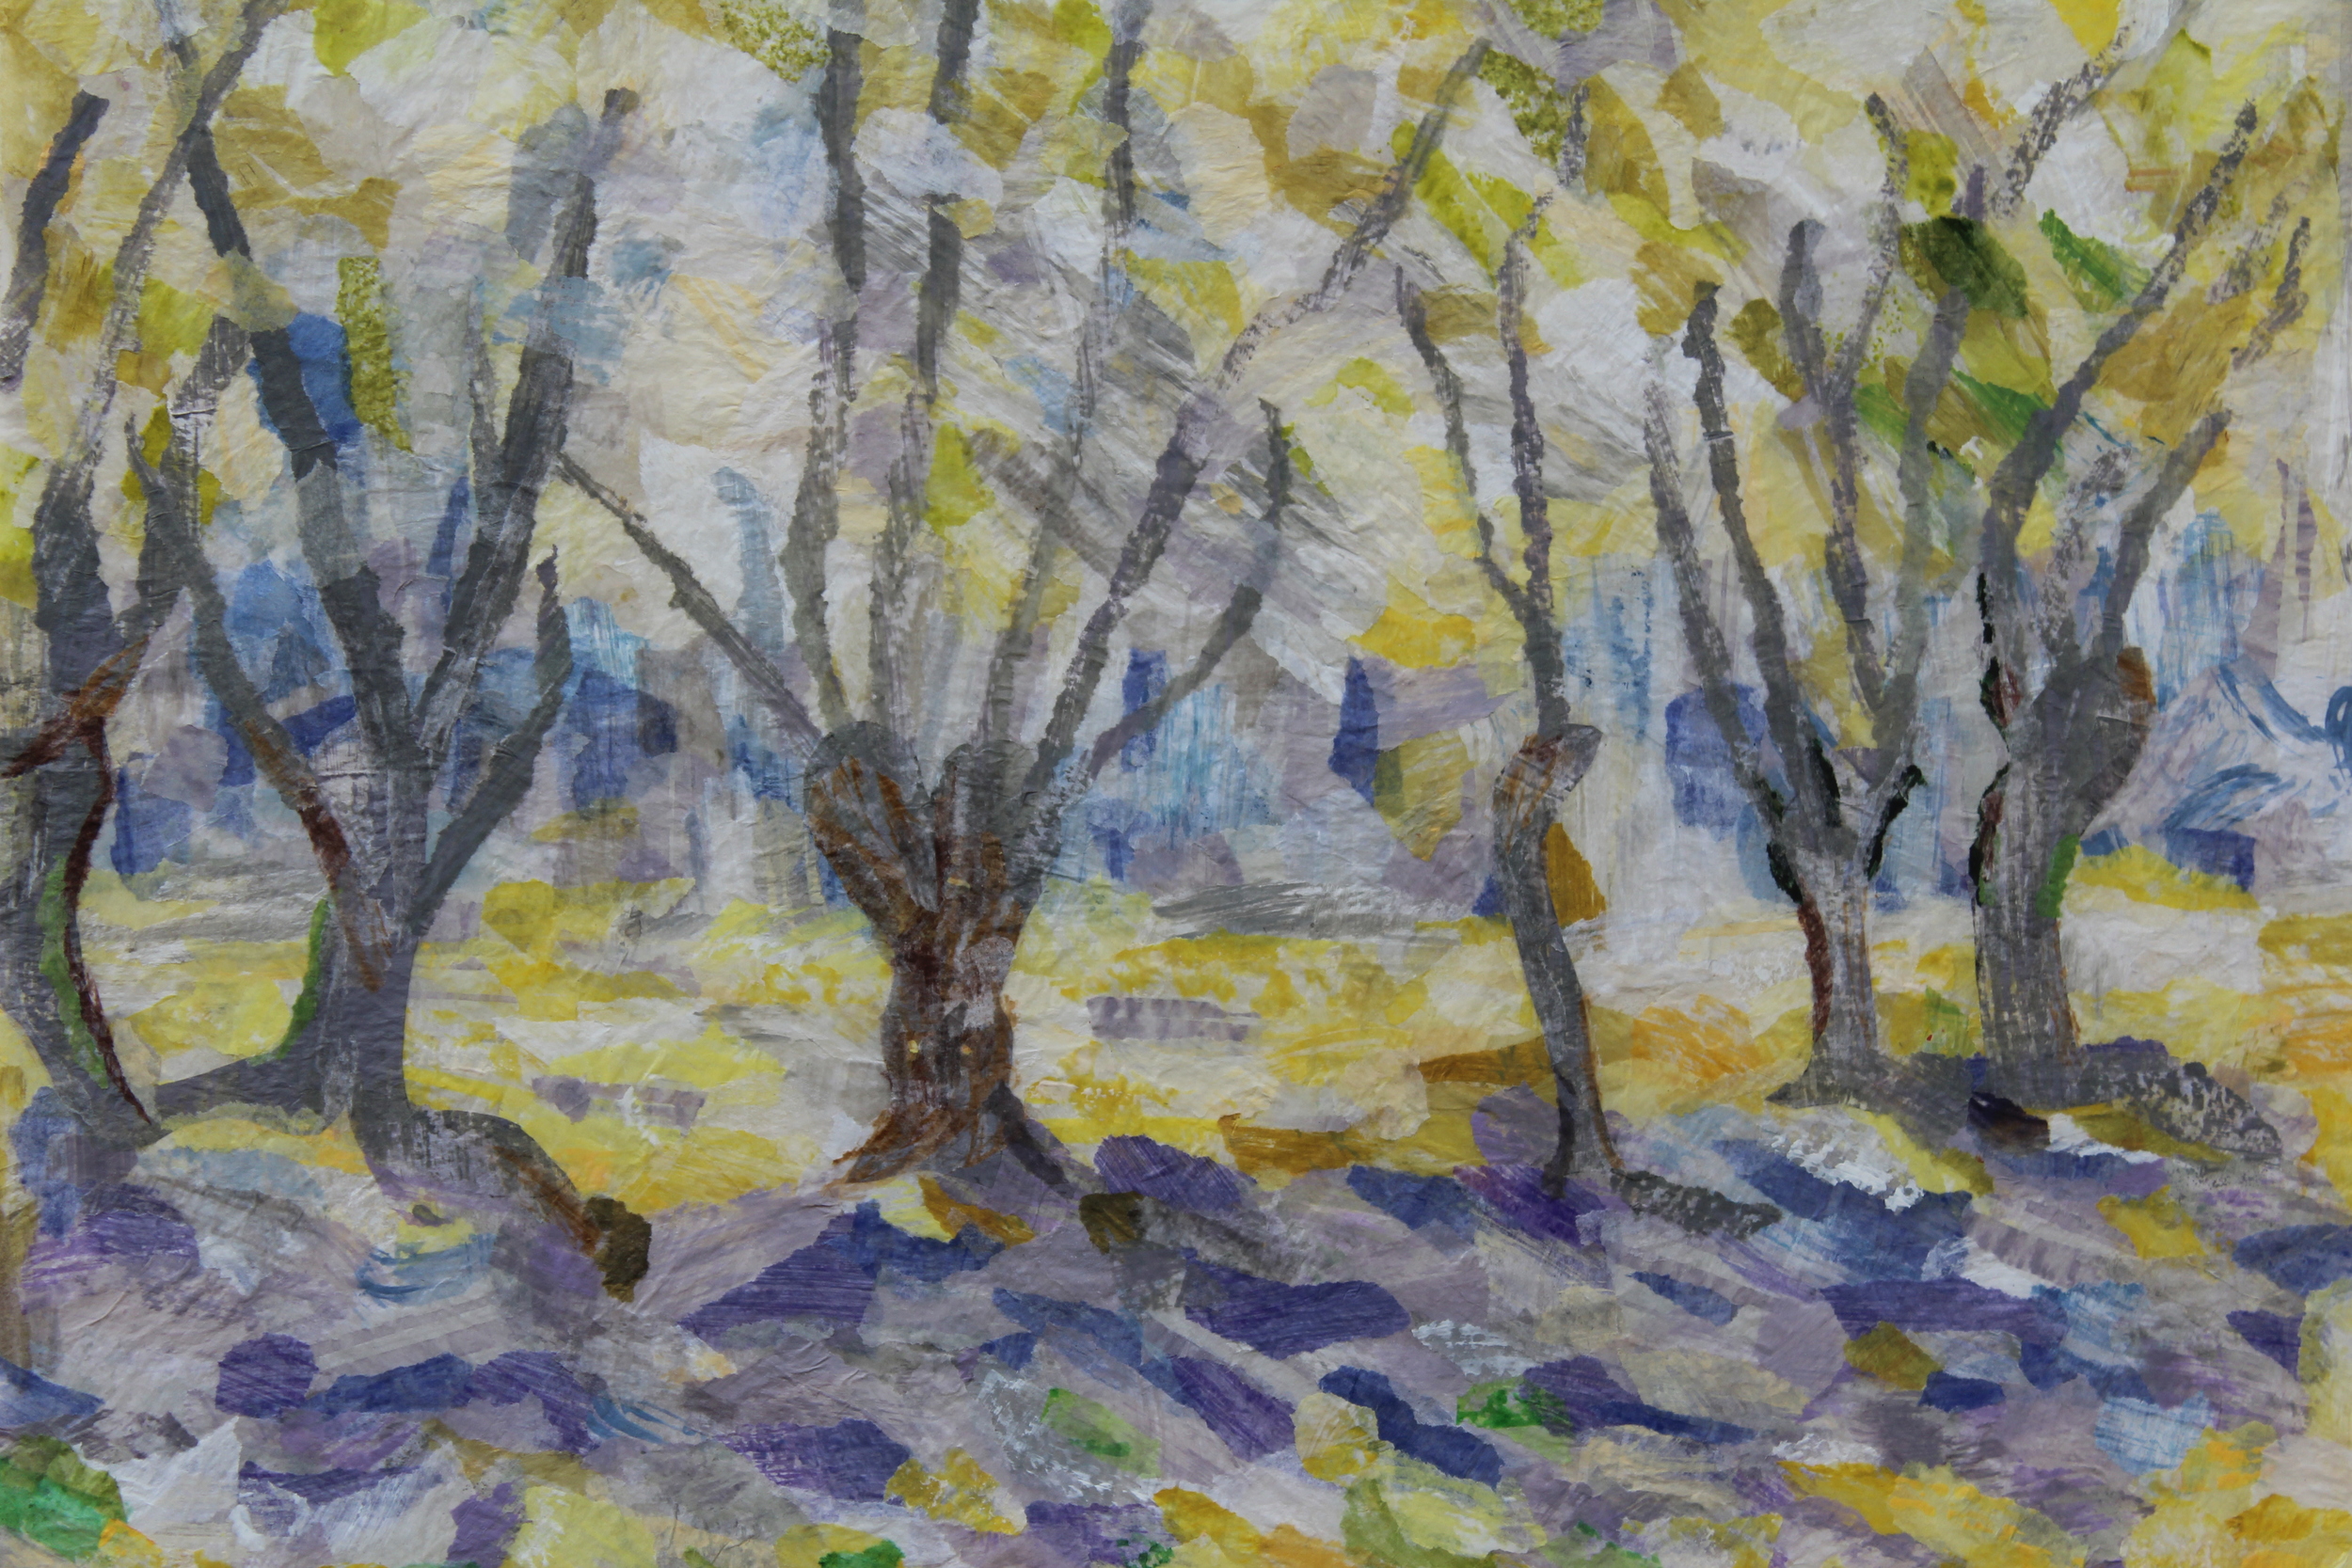 Tribute to Monet - Willows - SOLD